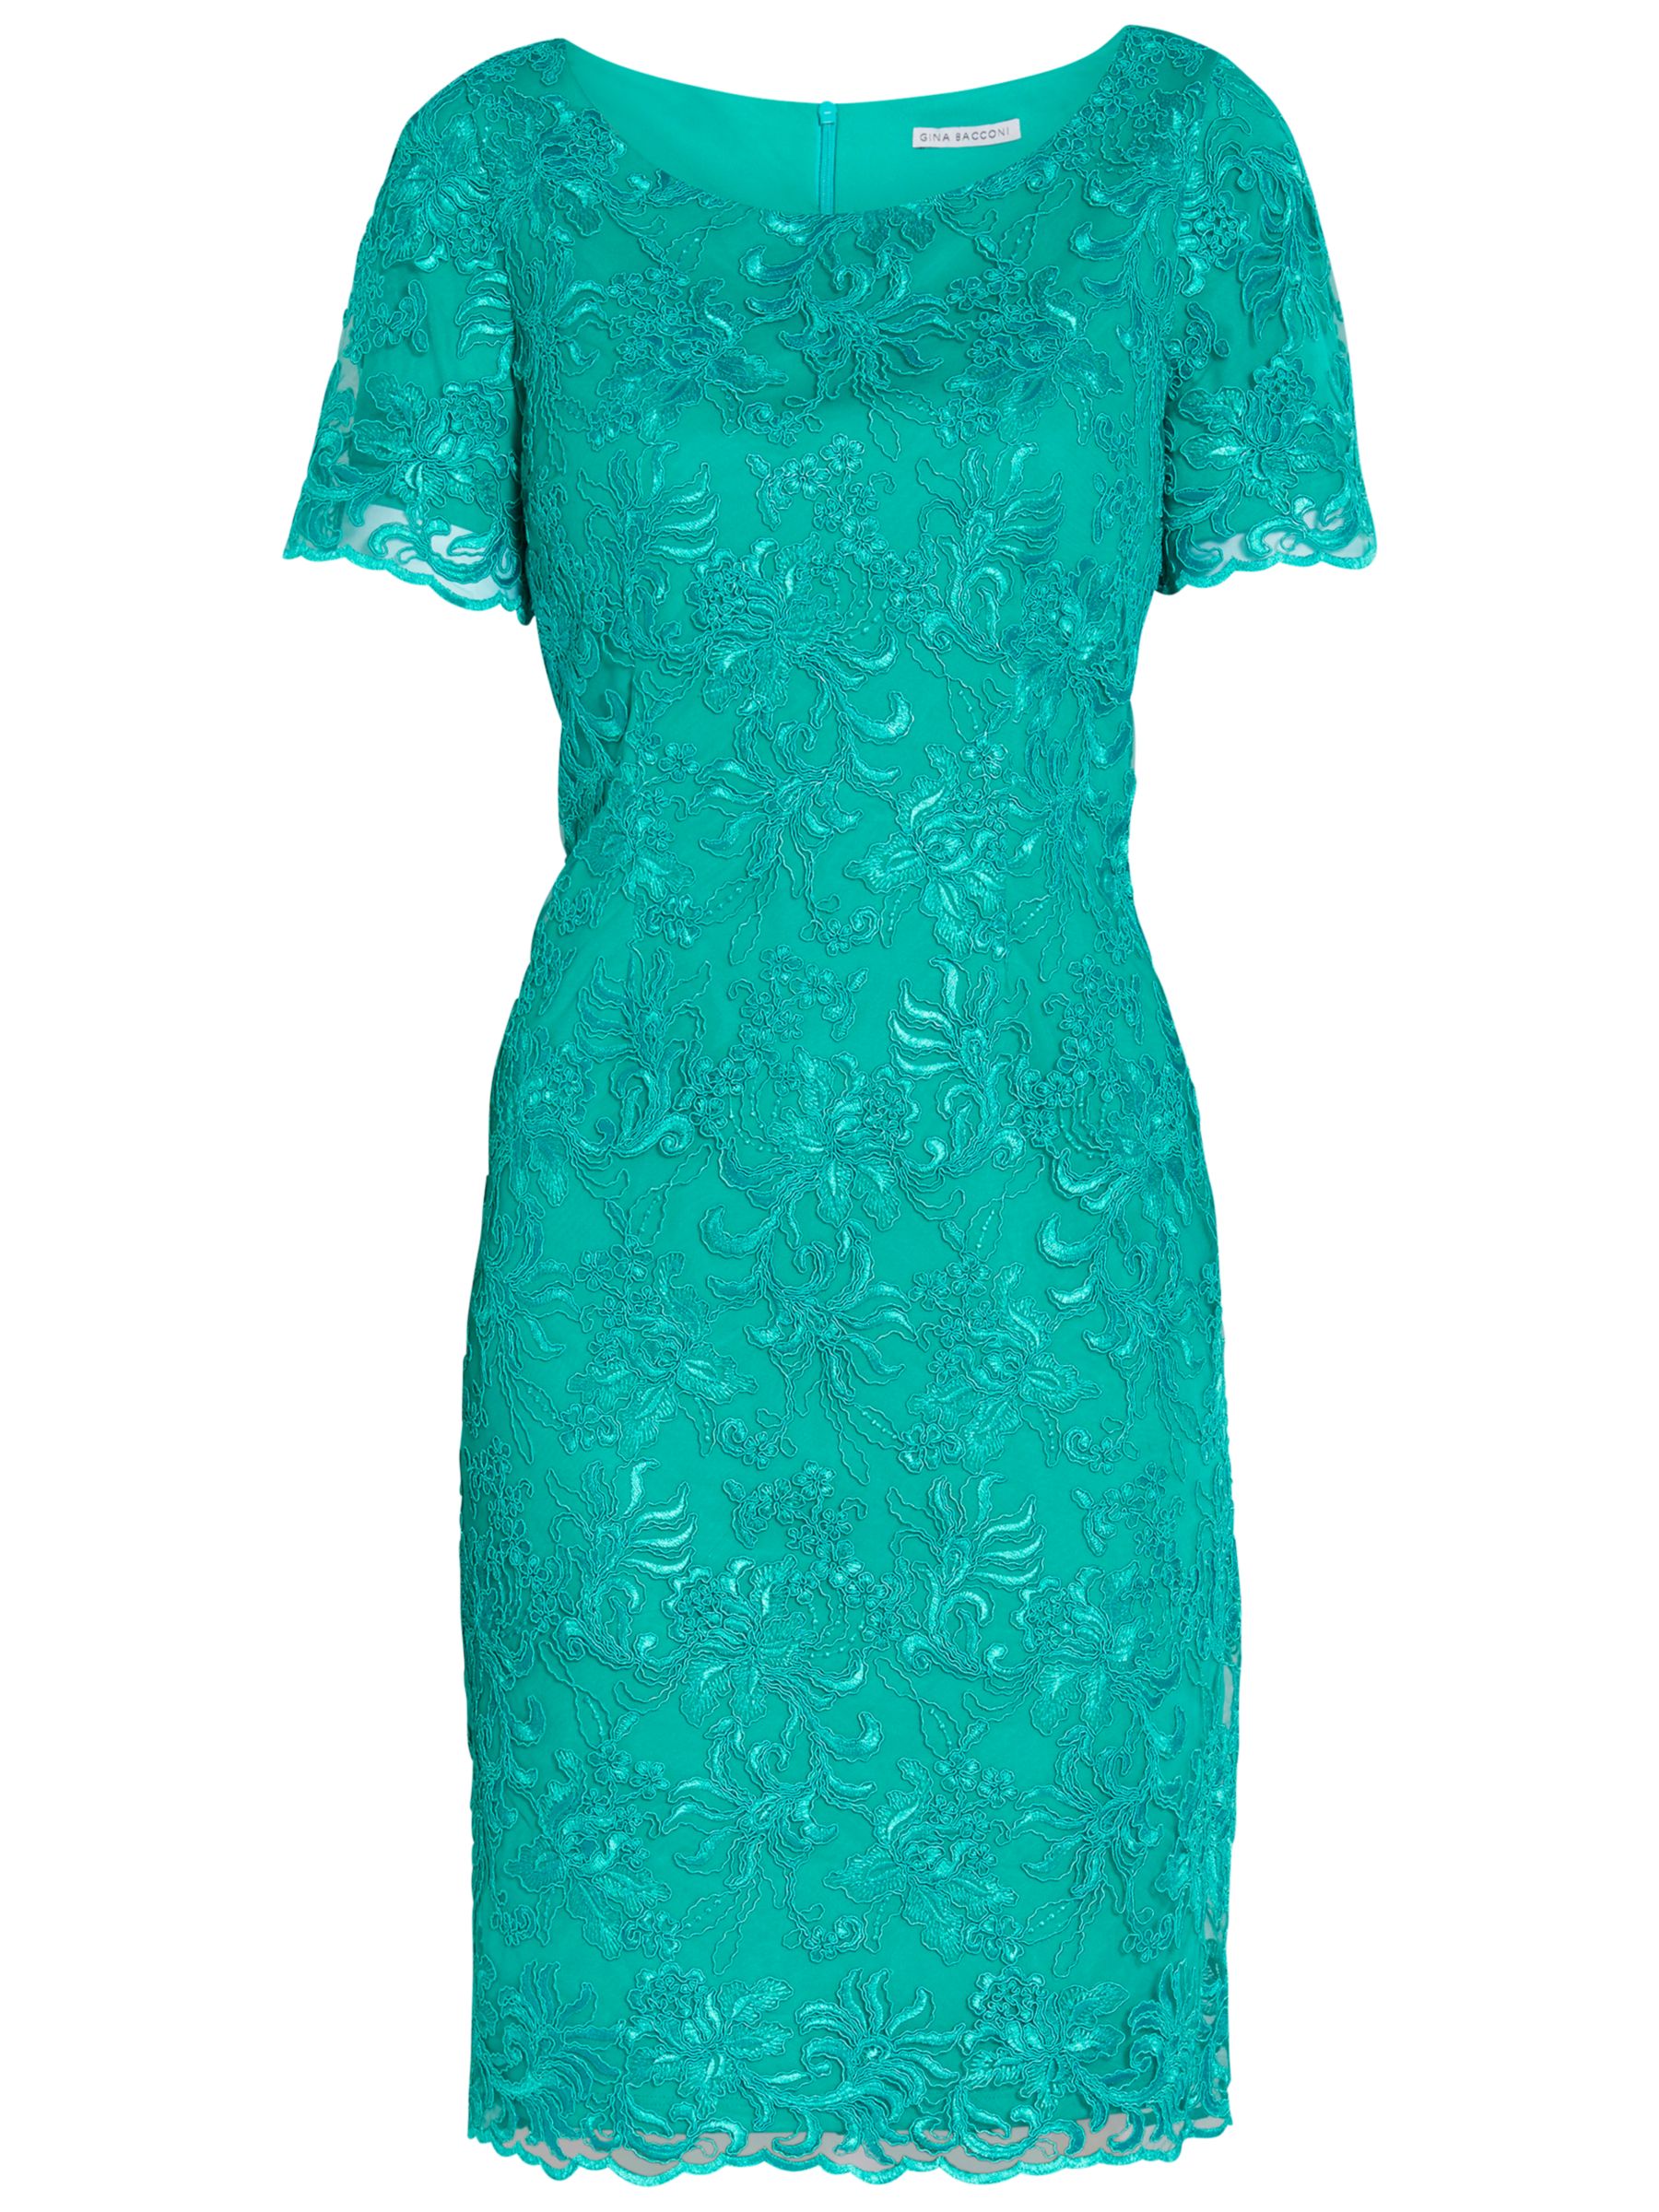 Gina Bacconi Embroidered Corded Dress, Summer Green, 20